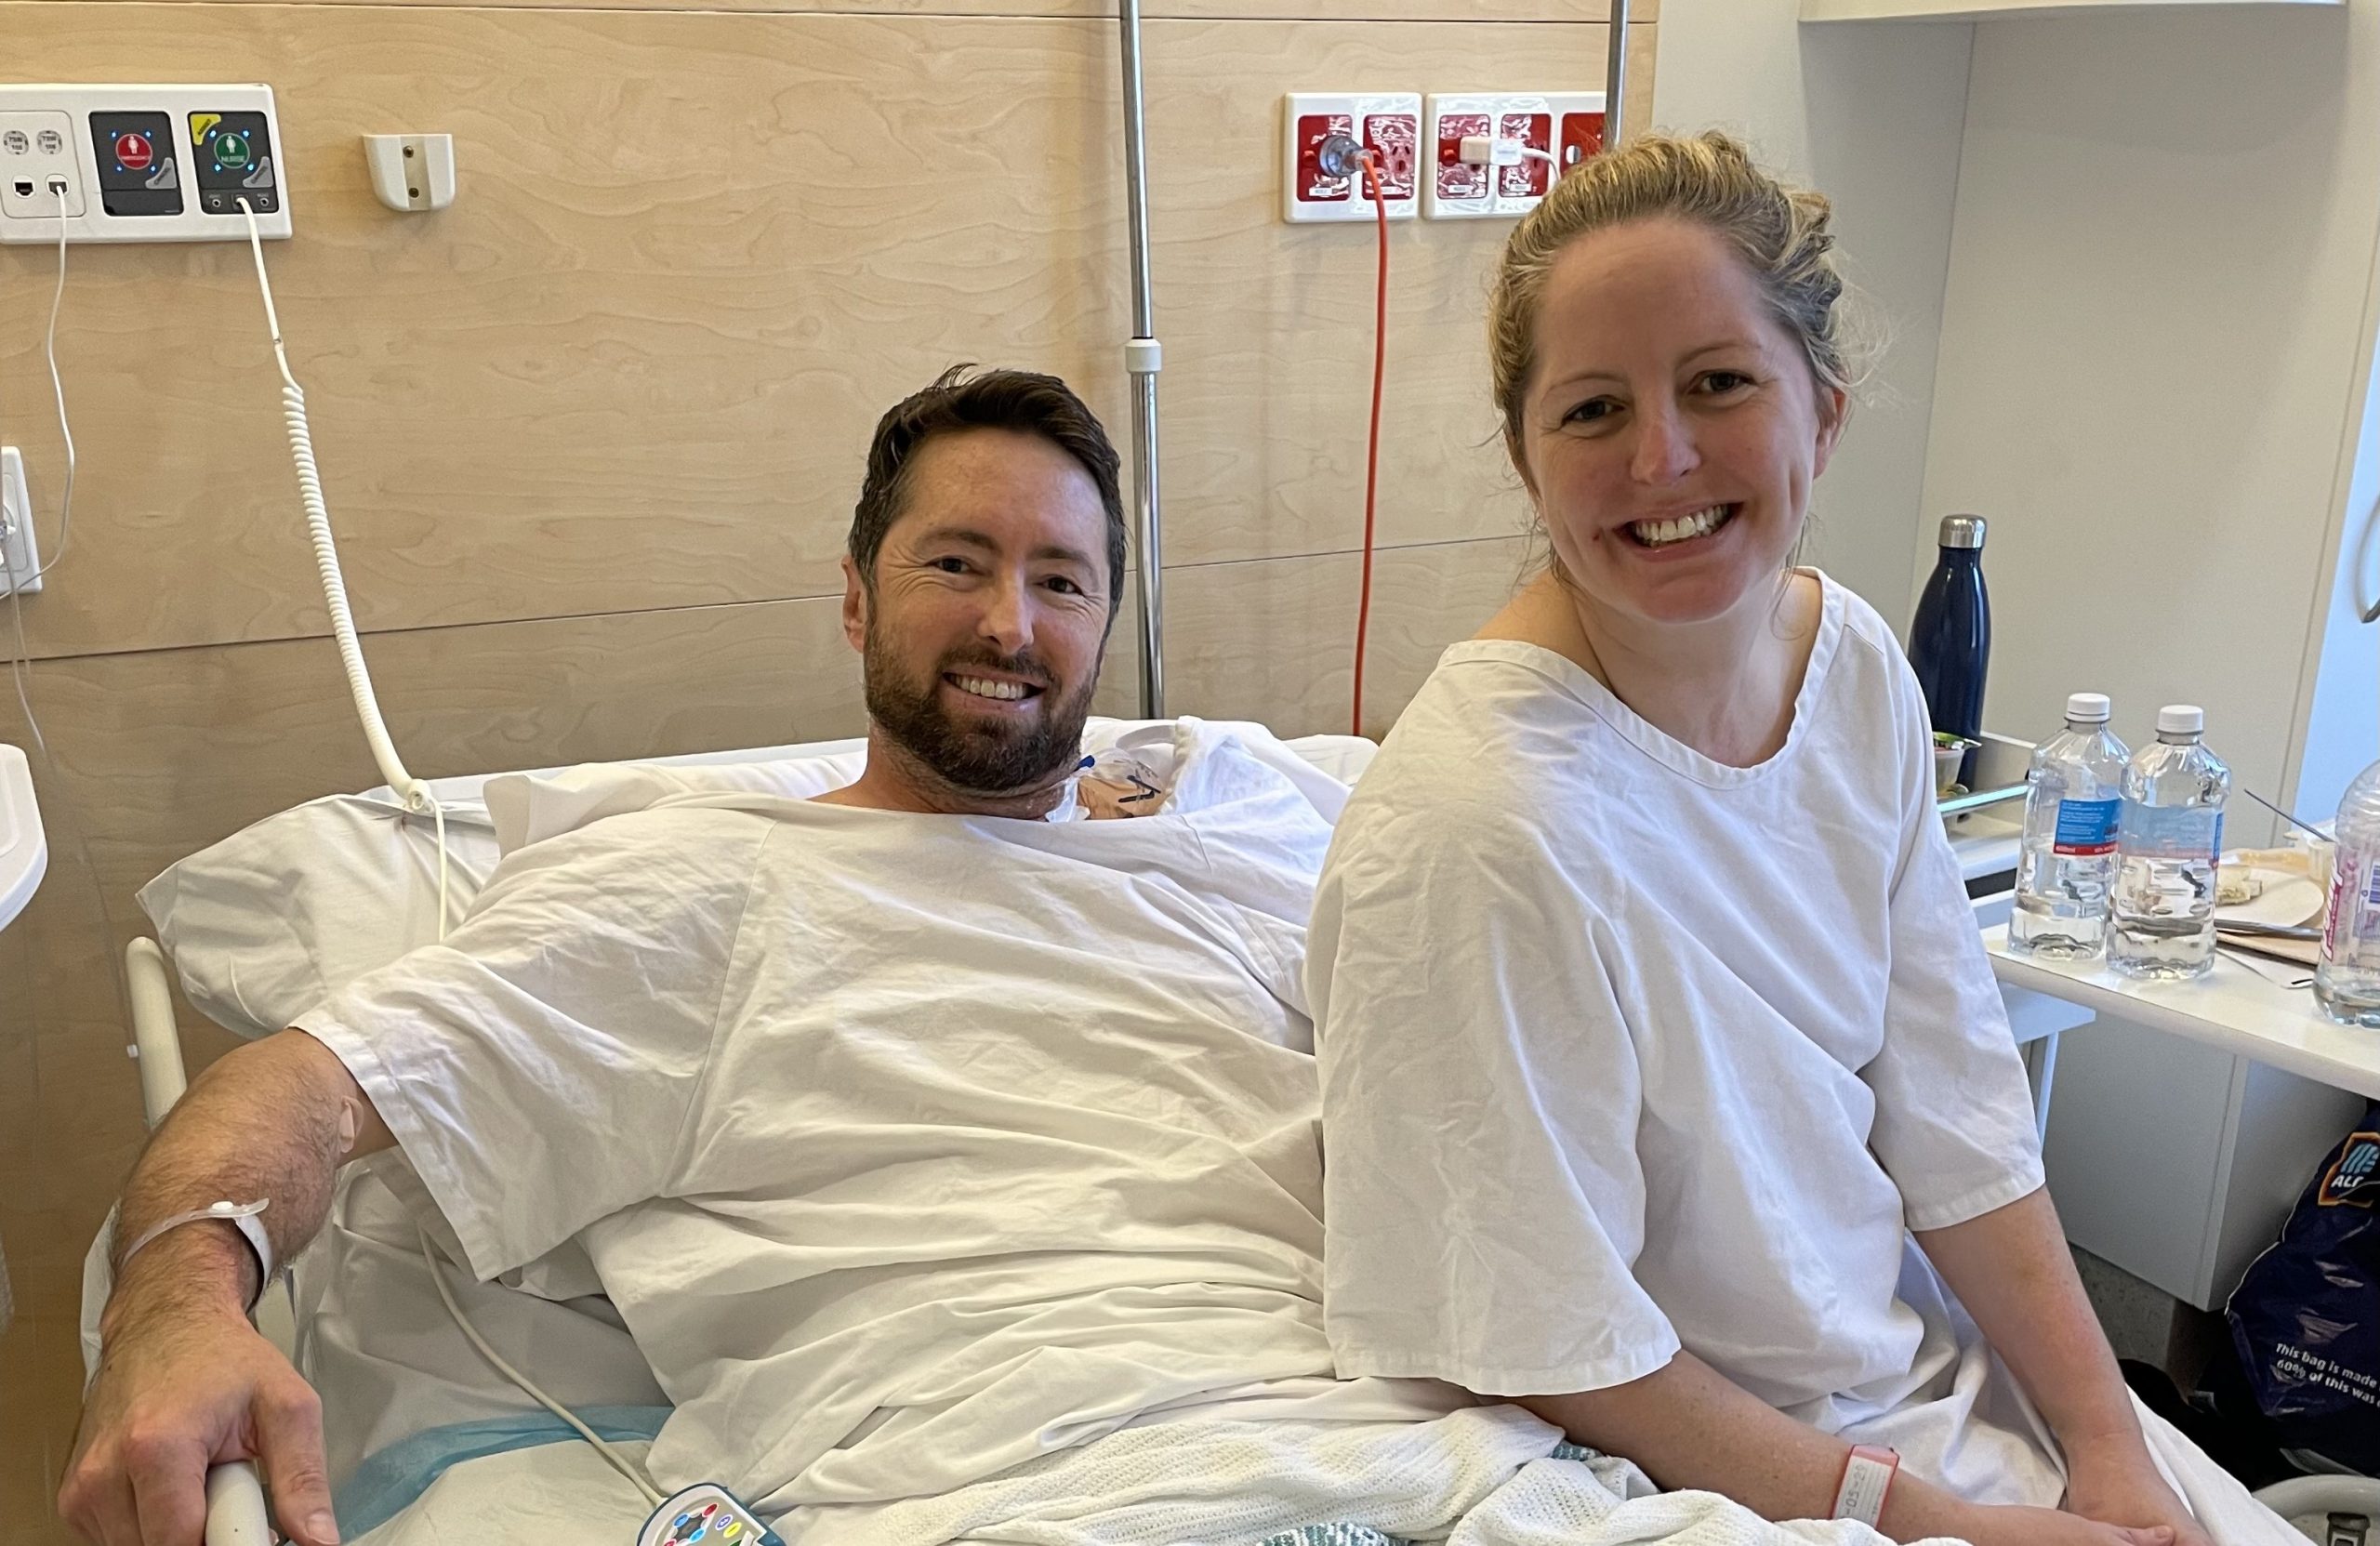 Man and woman on hospital bed smiling